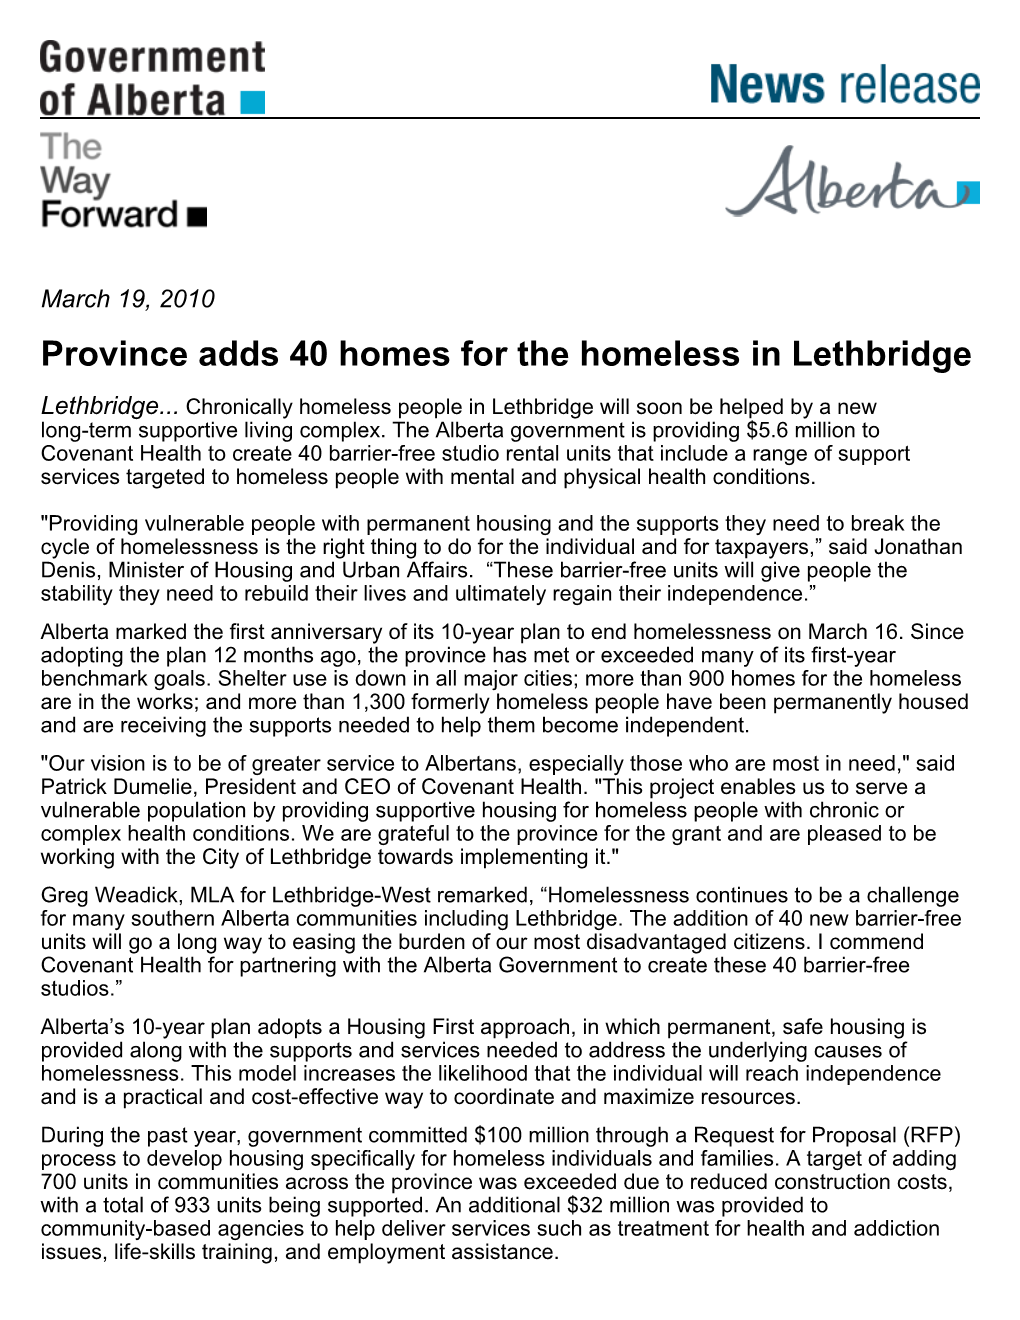 Province Adds 40 Homes for the Homeless in Lethbridge